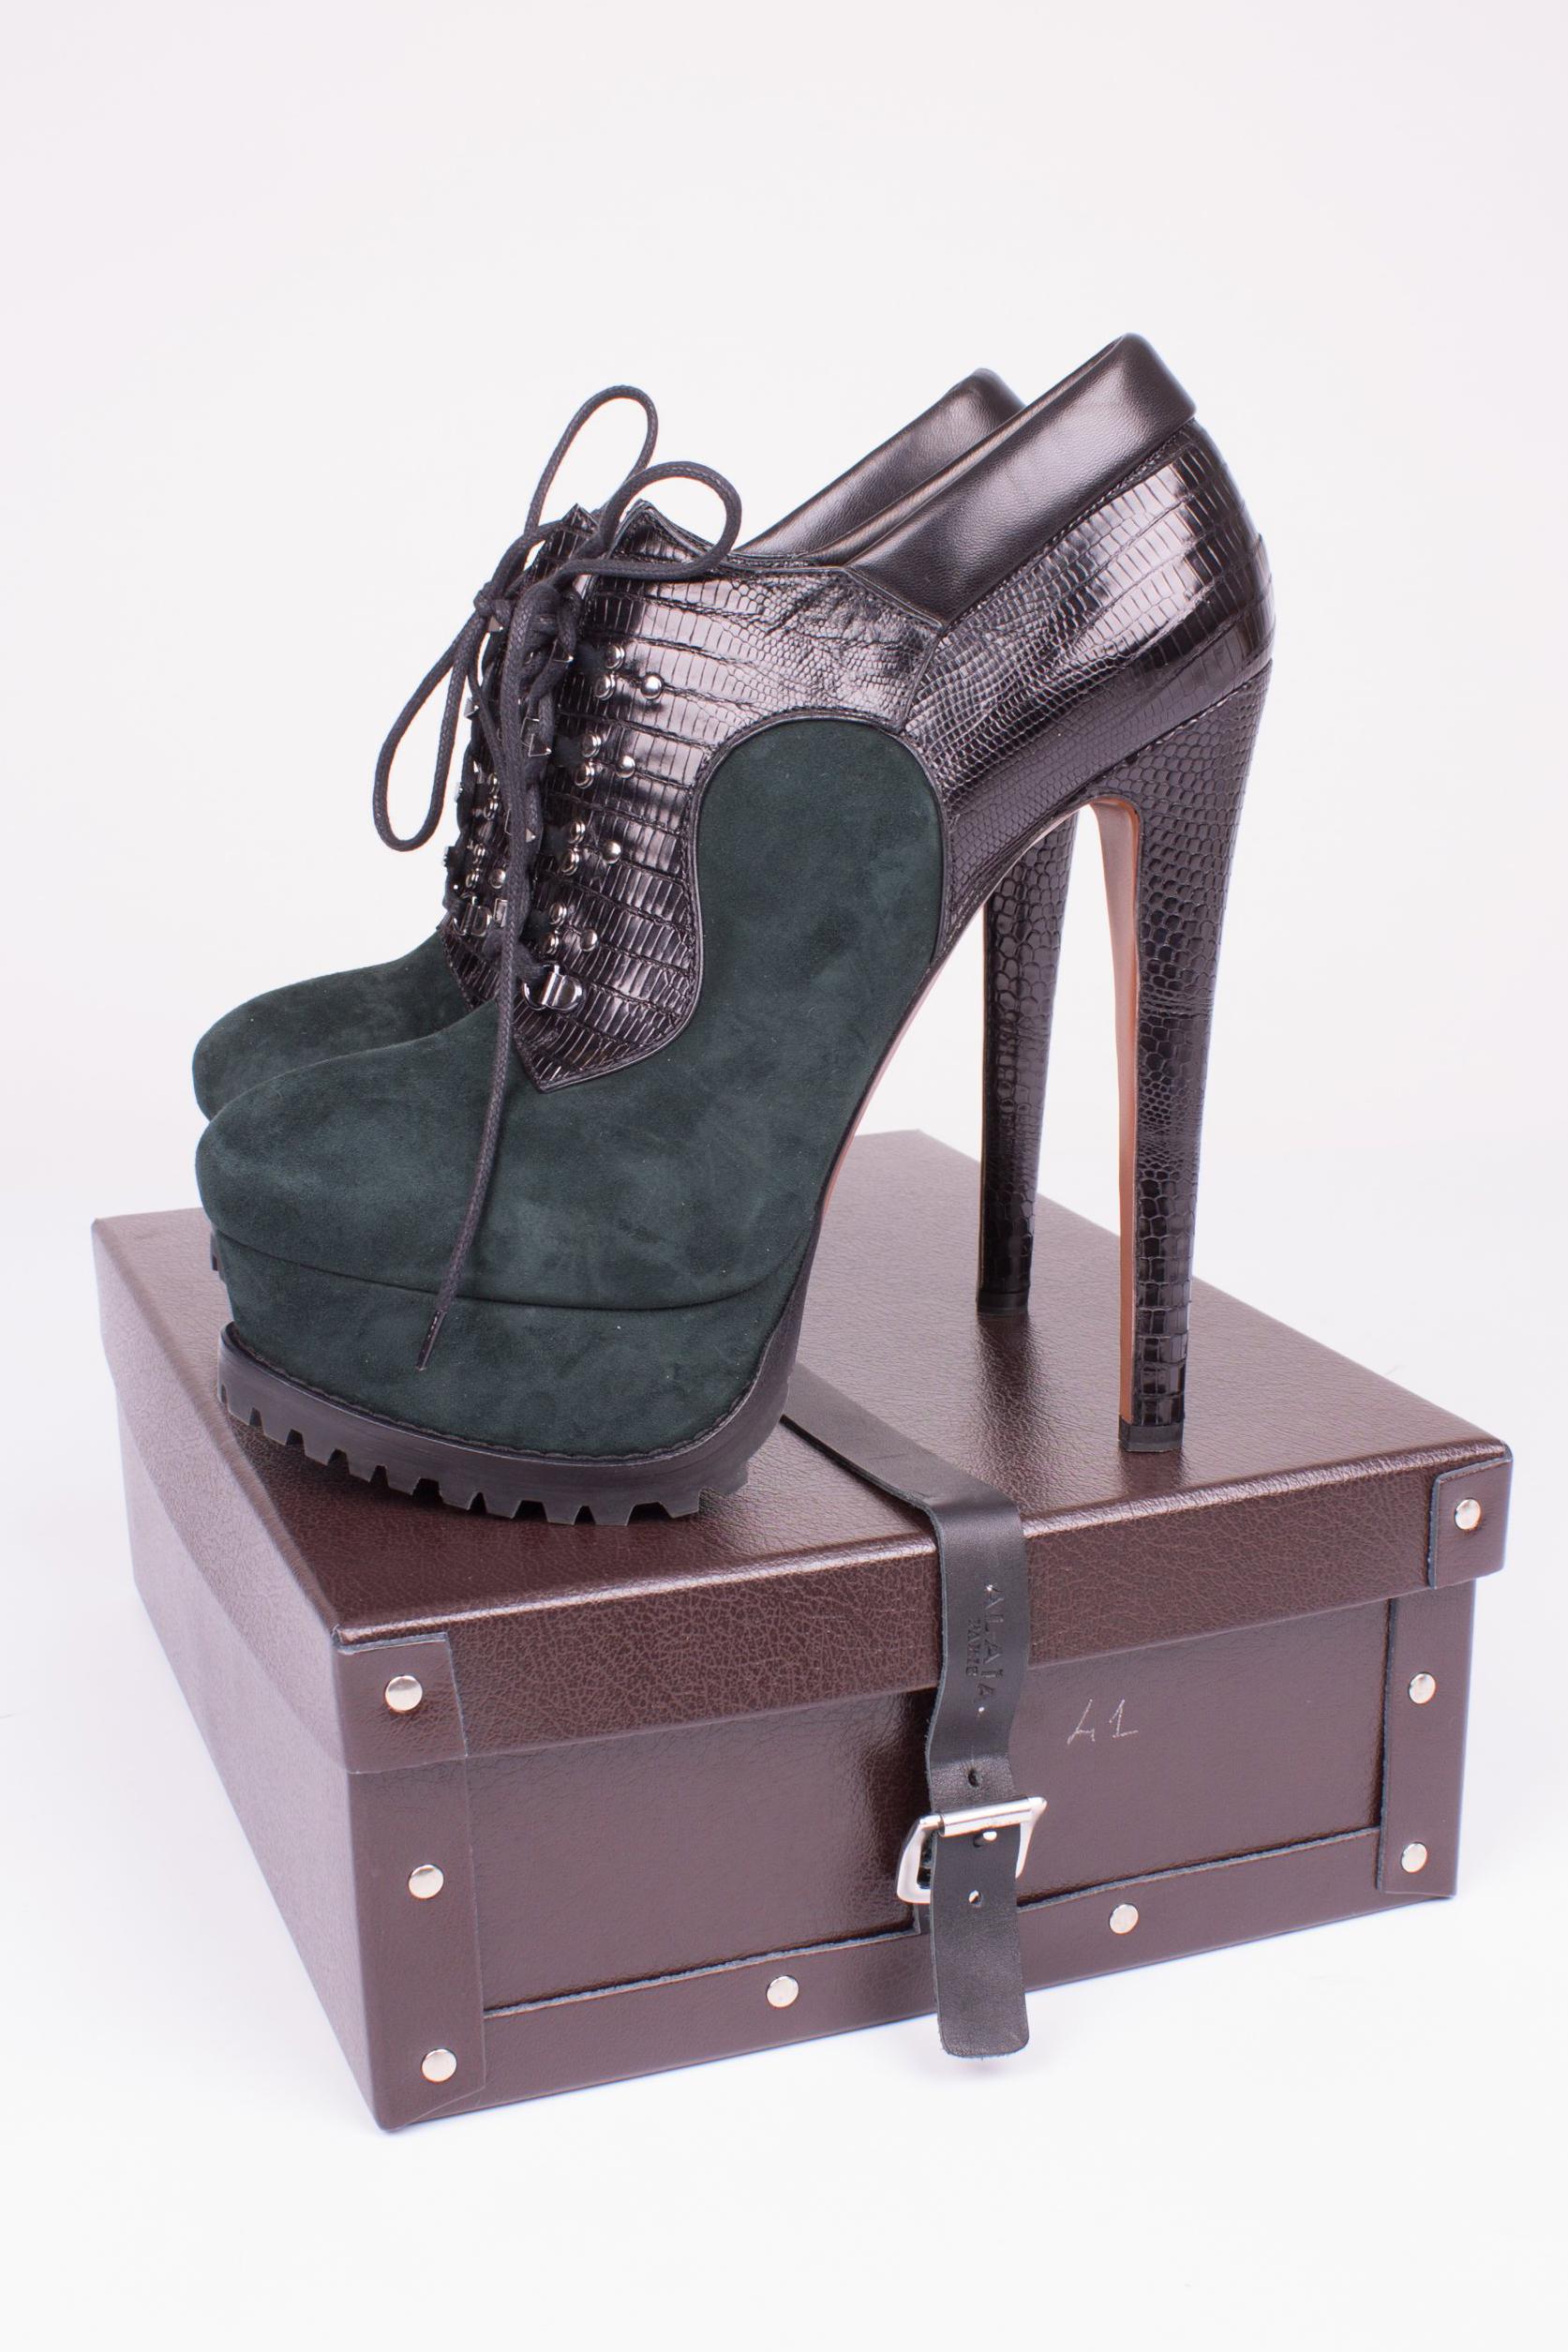 Sky high lace-up shoe by Alaïa in black croco-print leather and dark green suede.

The heel measures as much as 17 centimeters and the platform 4,5 centimeters. At the front a black lace. Interior fully lined with black leather, a nude colored